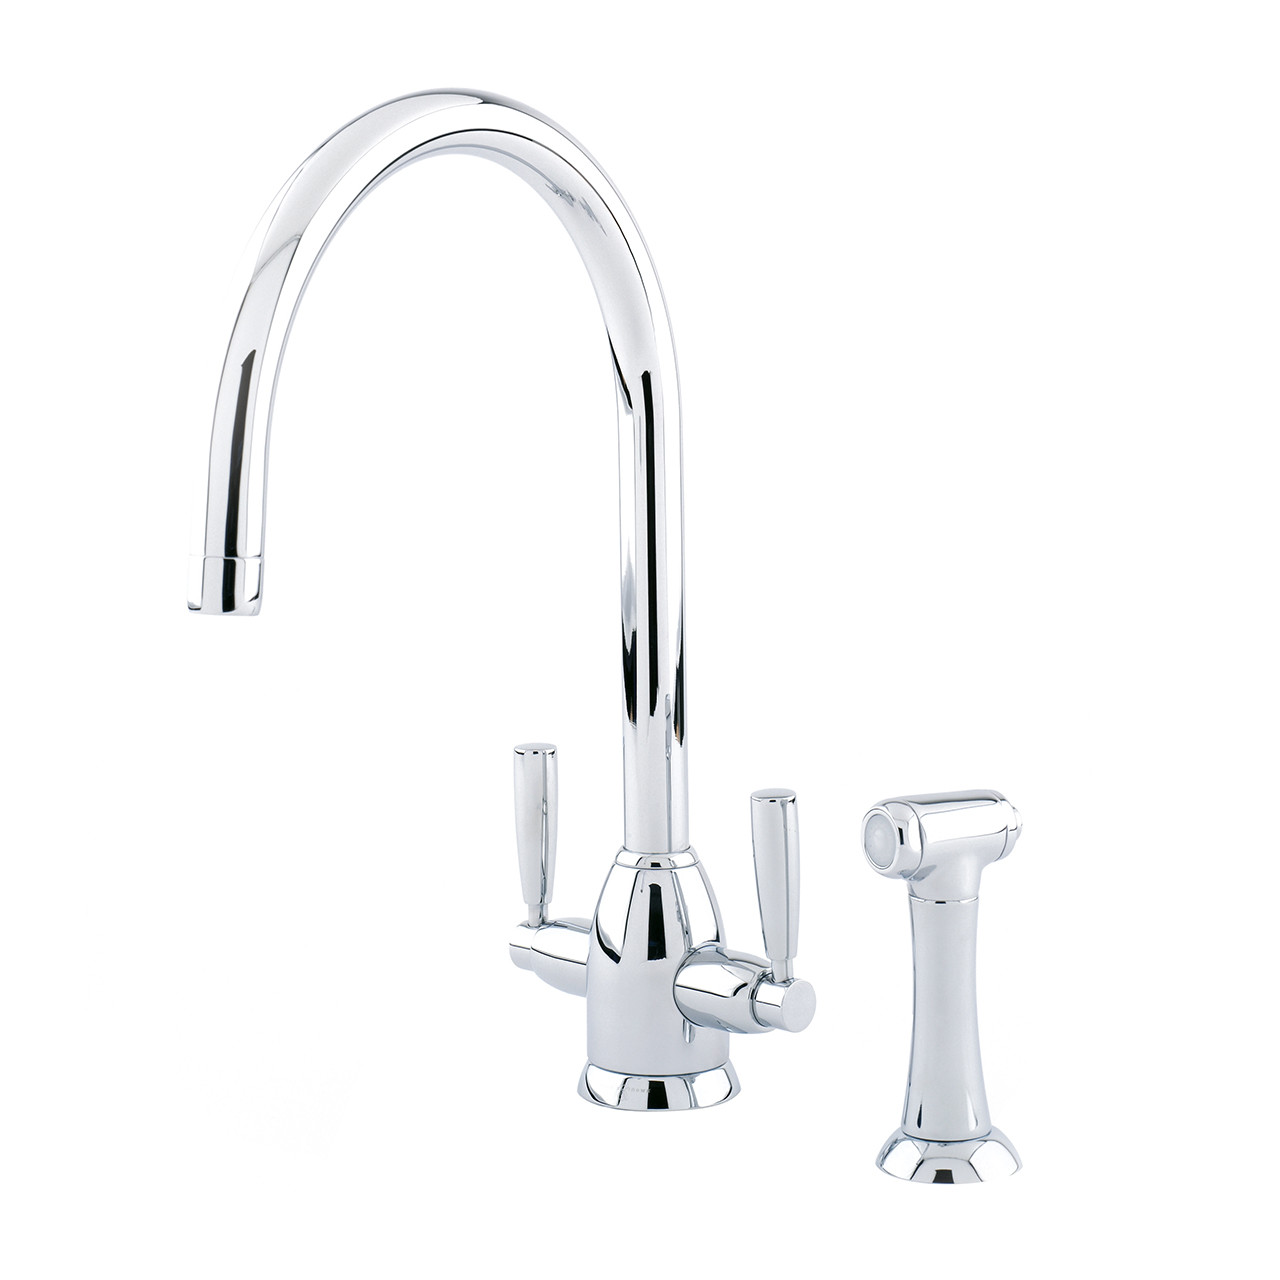 An image of Perrin & Rowe Oberon - C Spout 4866 (with Rinse) Kitchen Tap